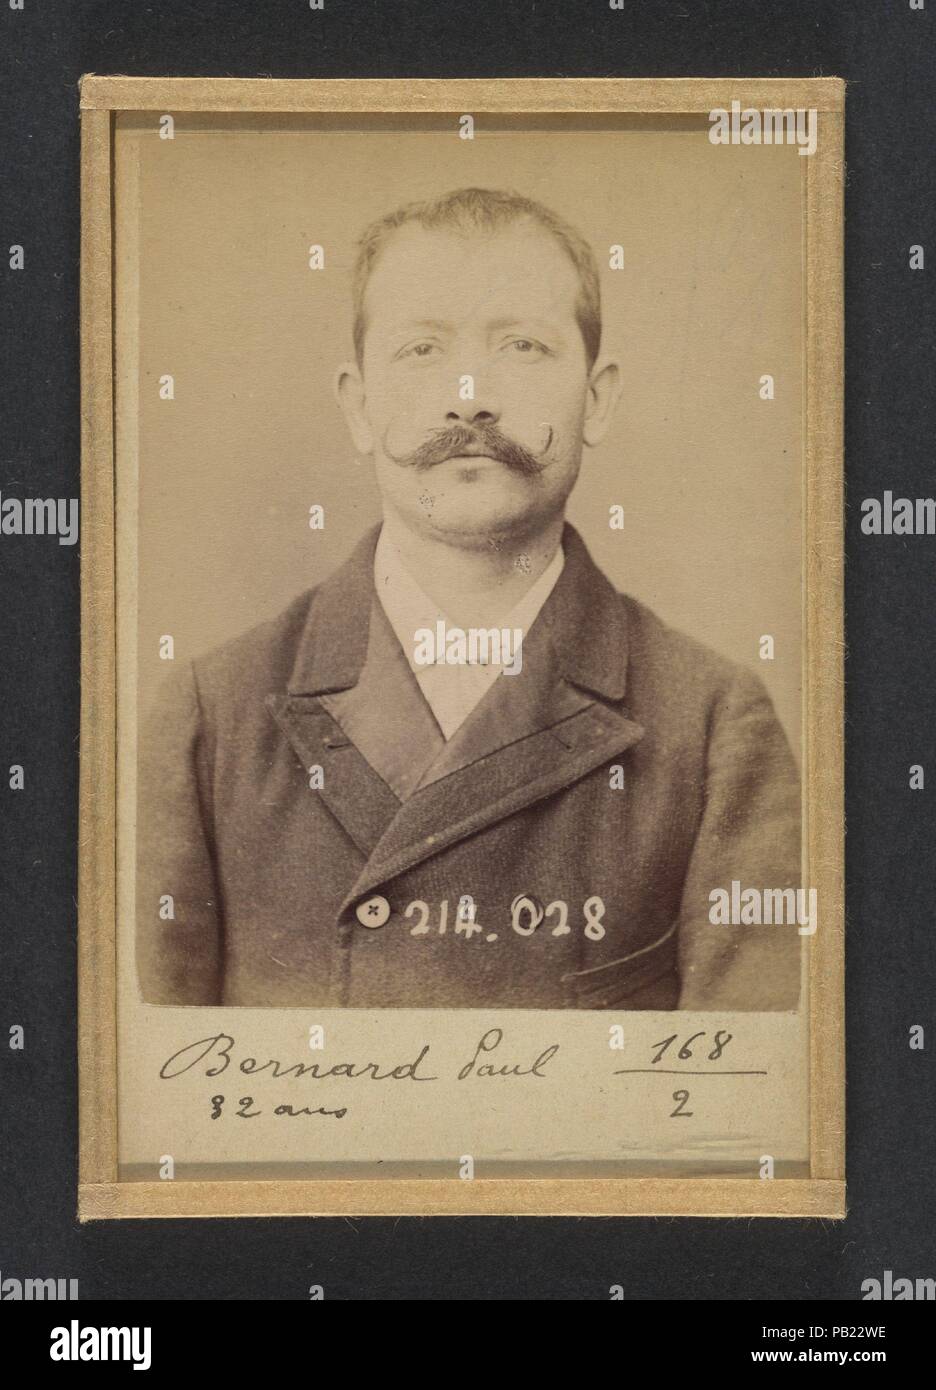 Bernard. Paul, Auguste. 32 ans, né à Crest (Drôme). Employé. Excitation au meurtre, anarchiste. 11/2/94. Artist: Alphonse Bertillon (French, 1853-1914). Dimensions: 10.5 x 7 x 0.5 cm (4 1/8 x 2 3/4 x 3/16 in.) each. Date: 1894.  Born into a distinguished family of scientists and statisticians, Bertillon began his career as a clerk in the Identification Bureau of the Paris Prefecture of Police in 1879. Tasked with maintaining reliable police records of offenders, he developed the first modern system of criminal identification. The system, which became known as Bertillonage, had three components Stock Photo